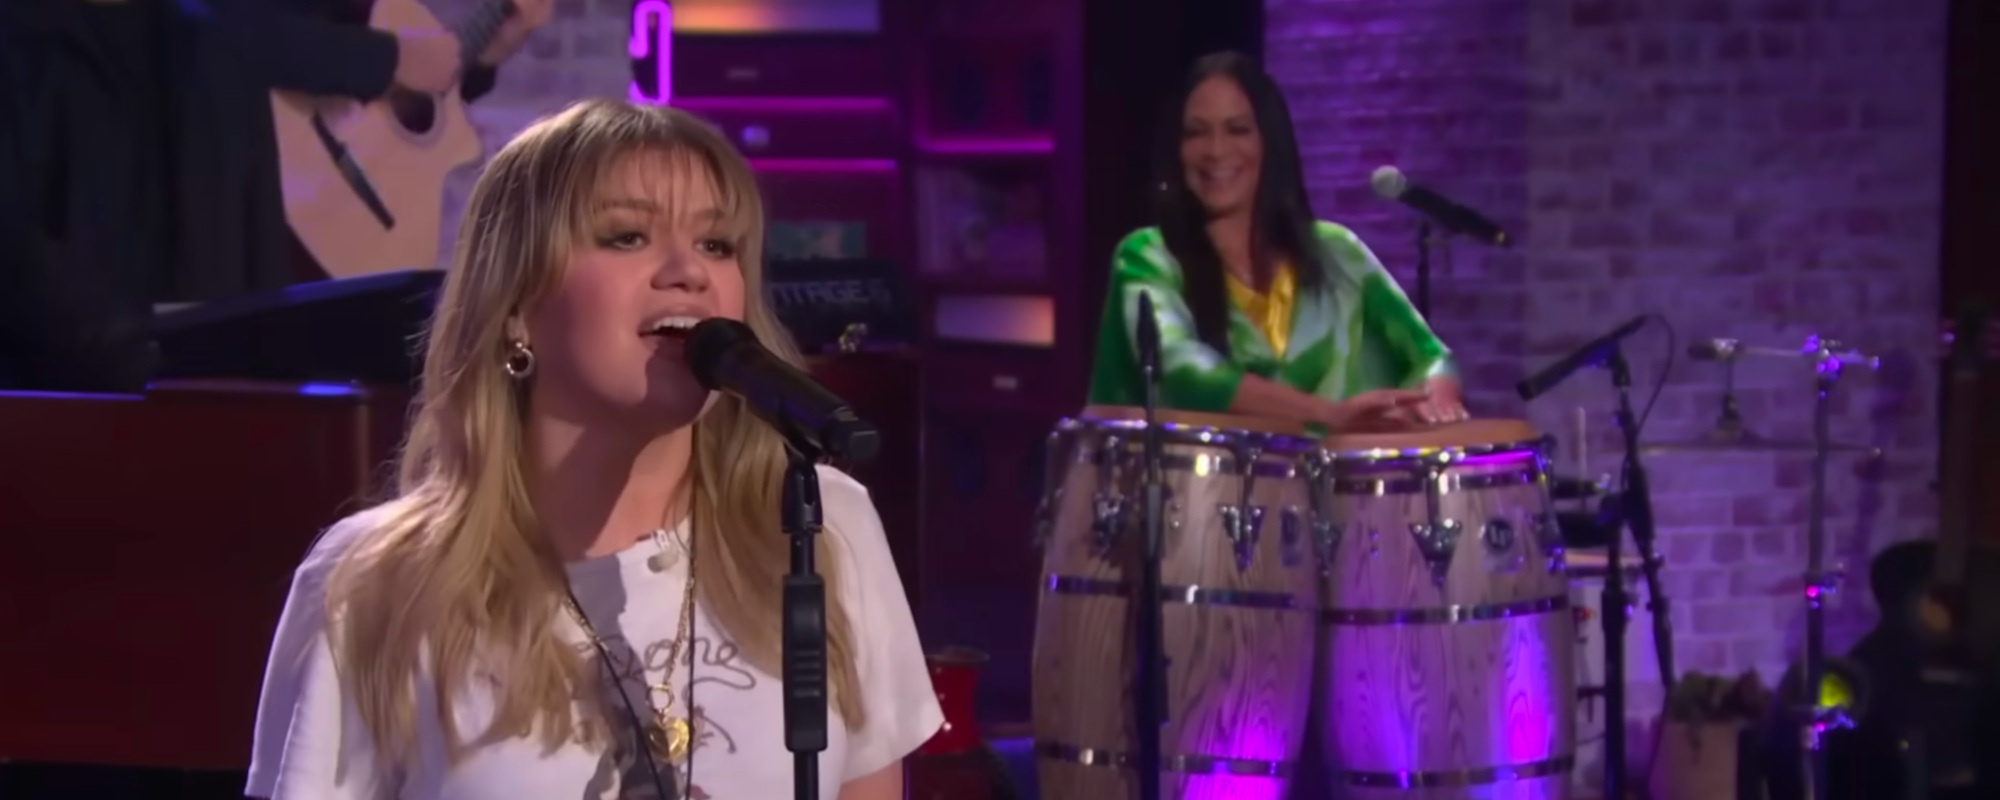 Watch: Kelly Clarkson and Sheila E Perform “that’s right” from Clarkson’s New Album